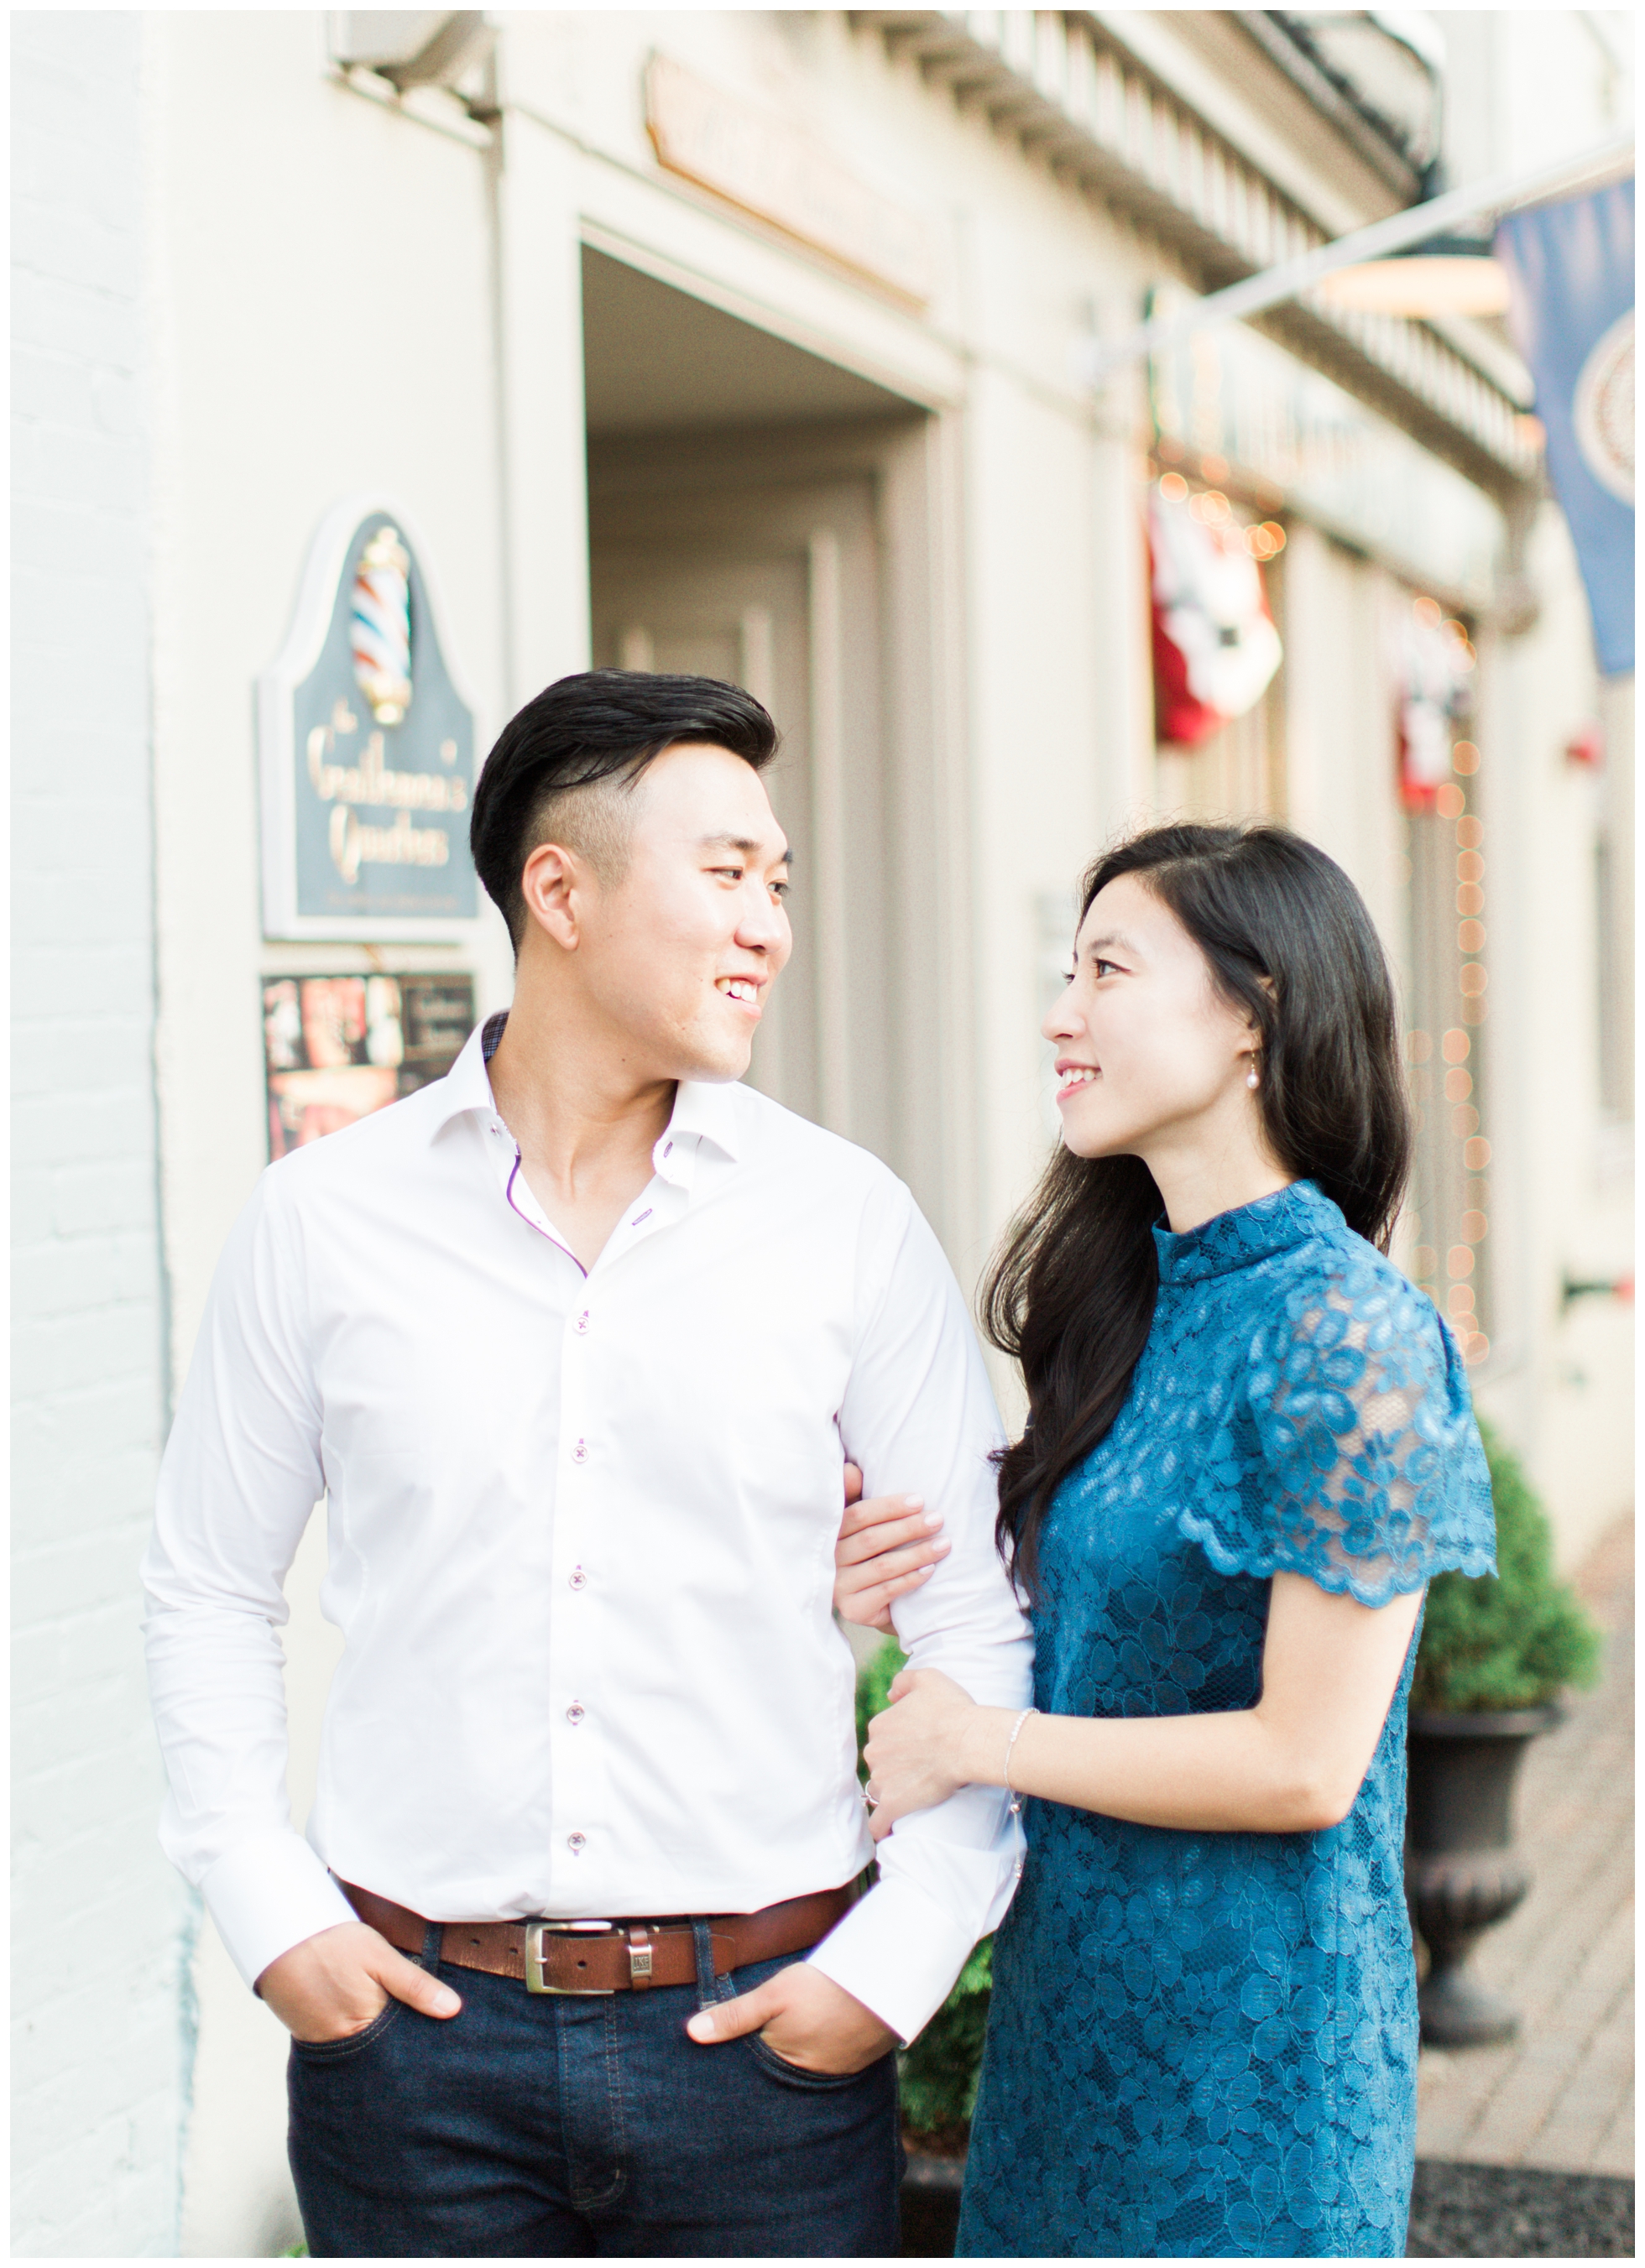 Beautiful Old Town Alexandria Engagement